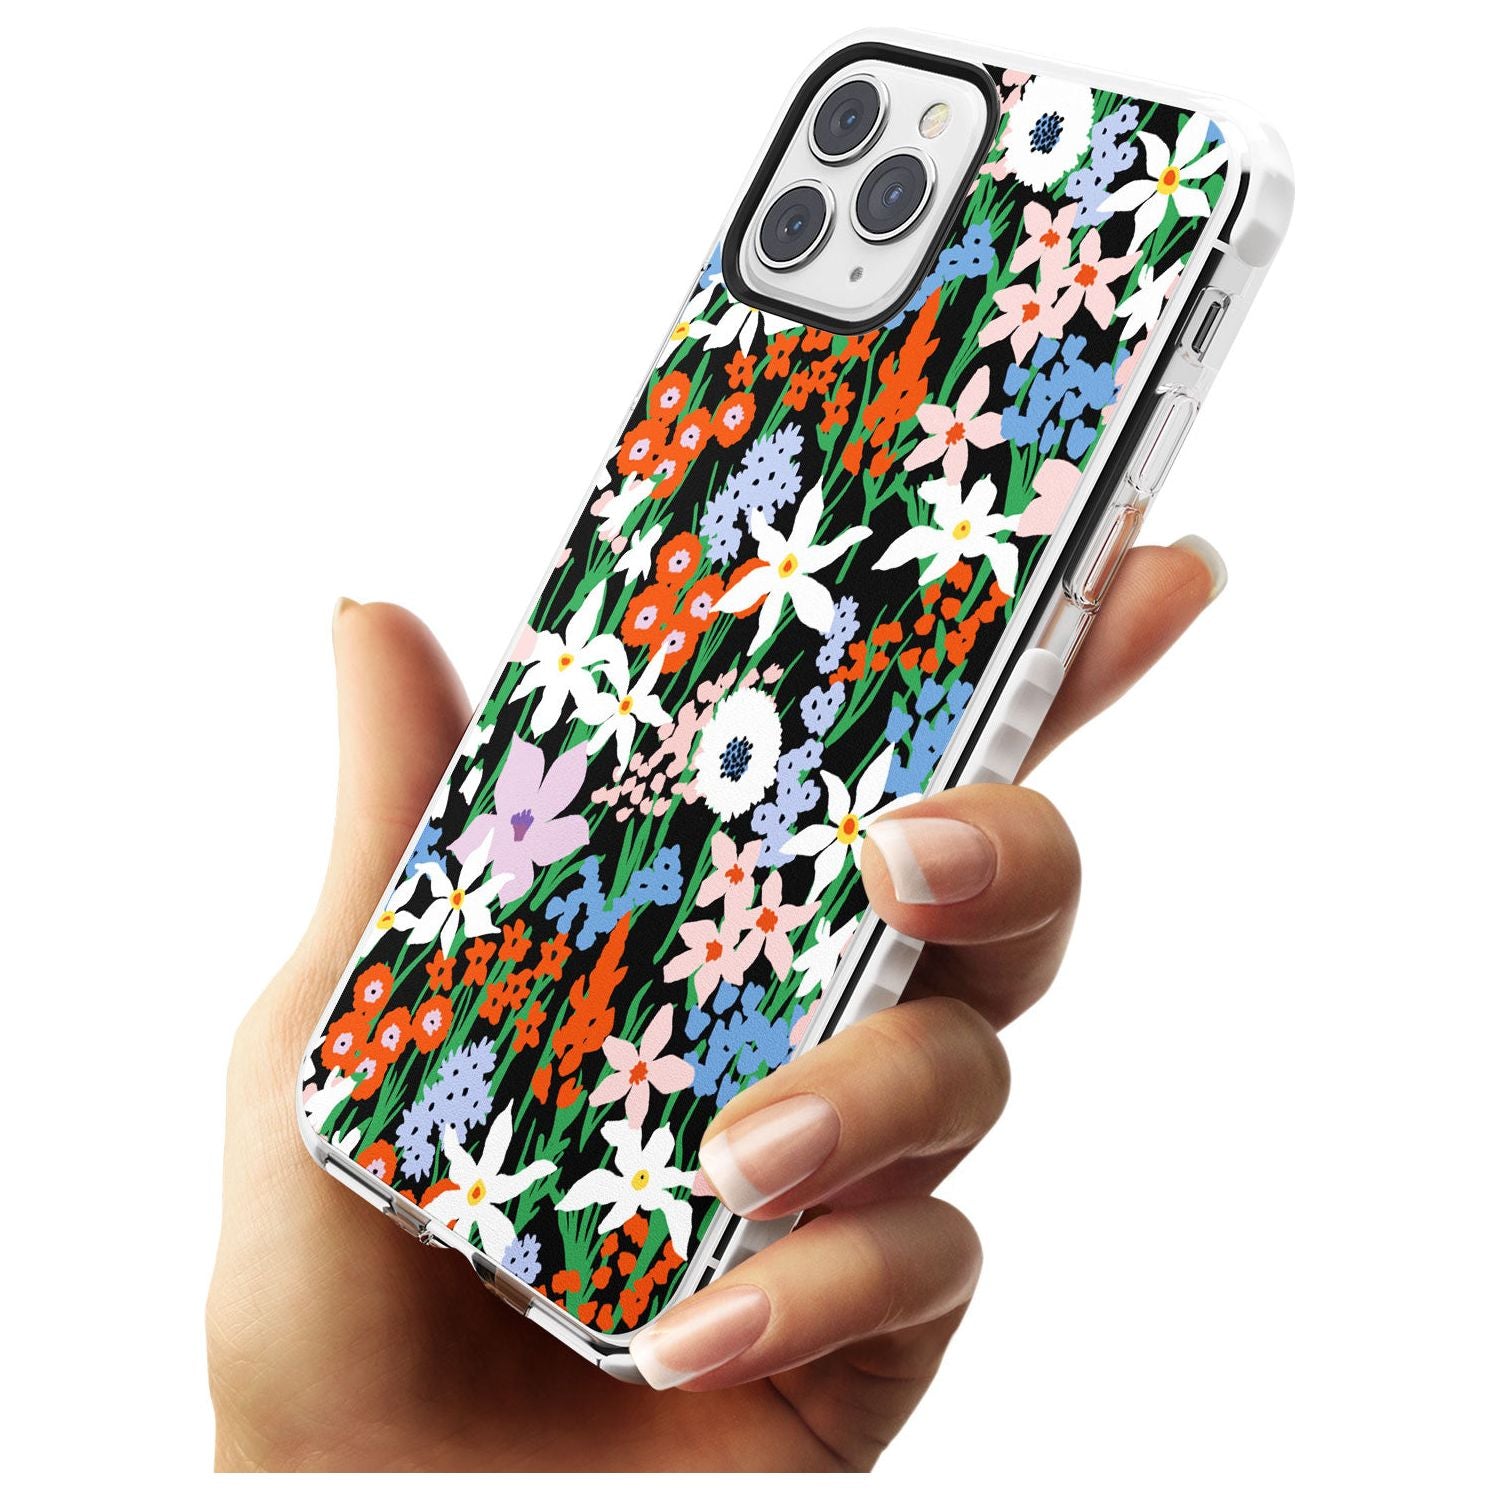 Springtime Meadow: Solid Slim TPU Phone Case for iPhone 11 Pro Max